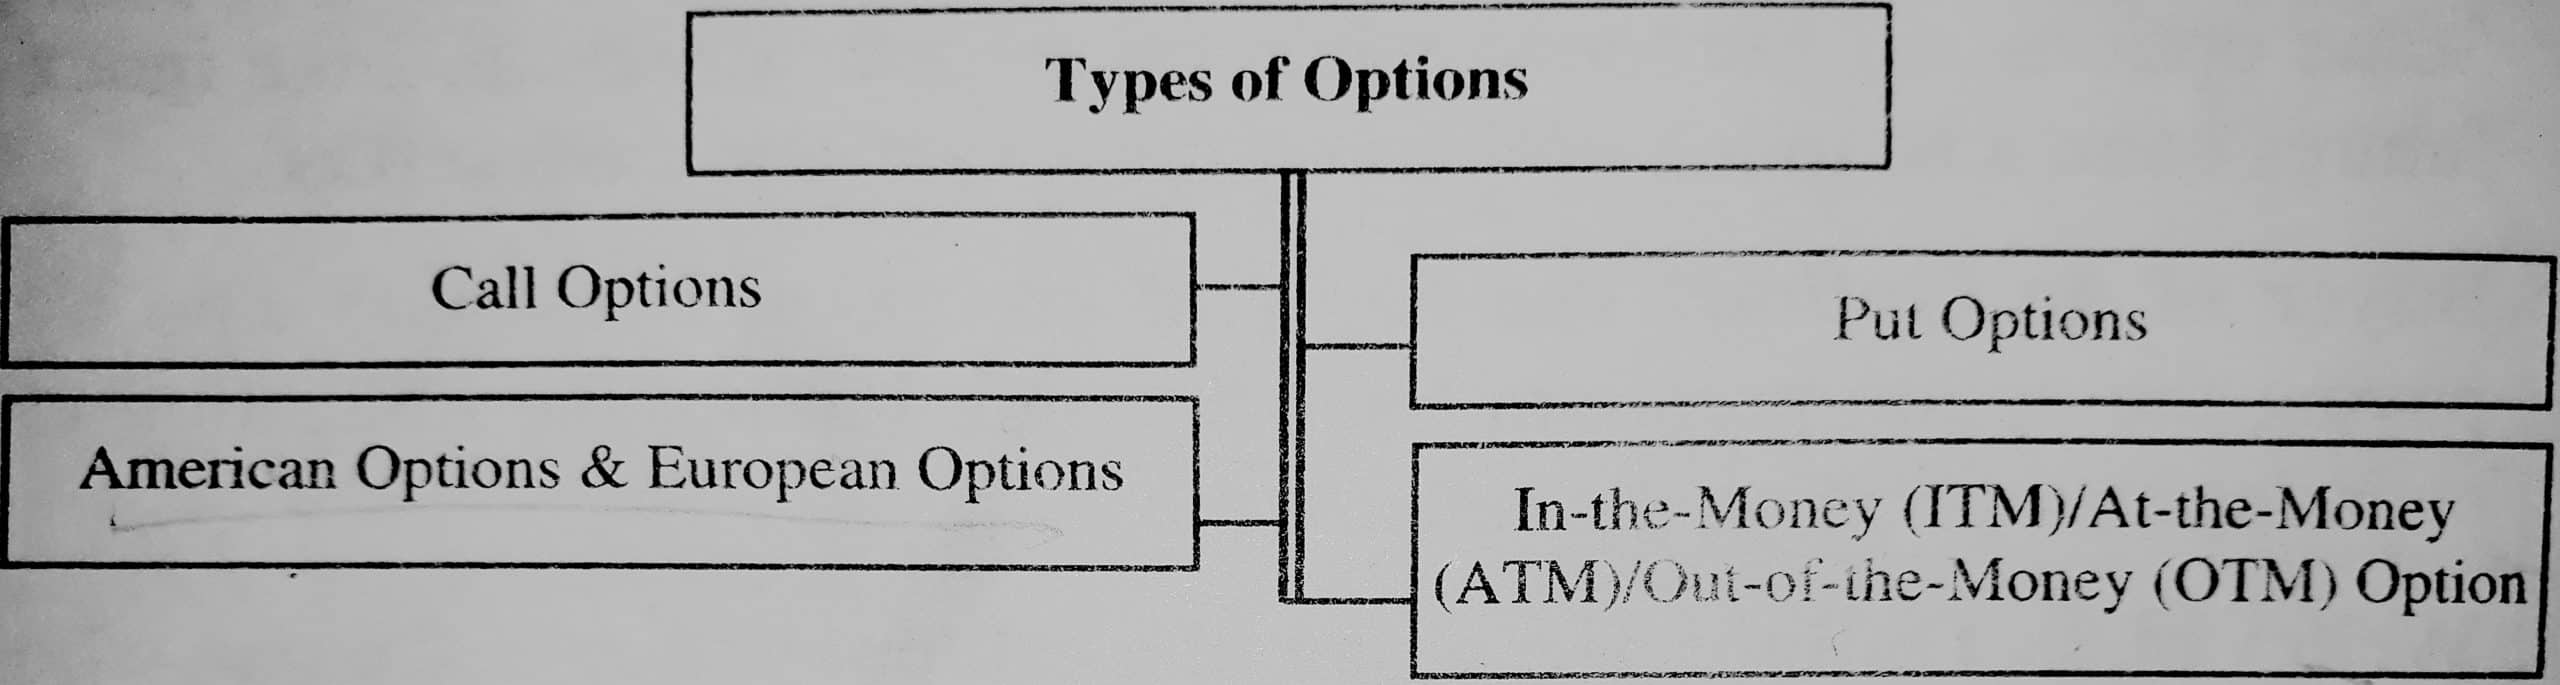 Types of Options